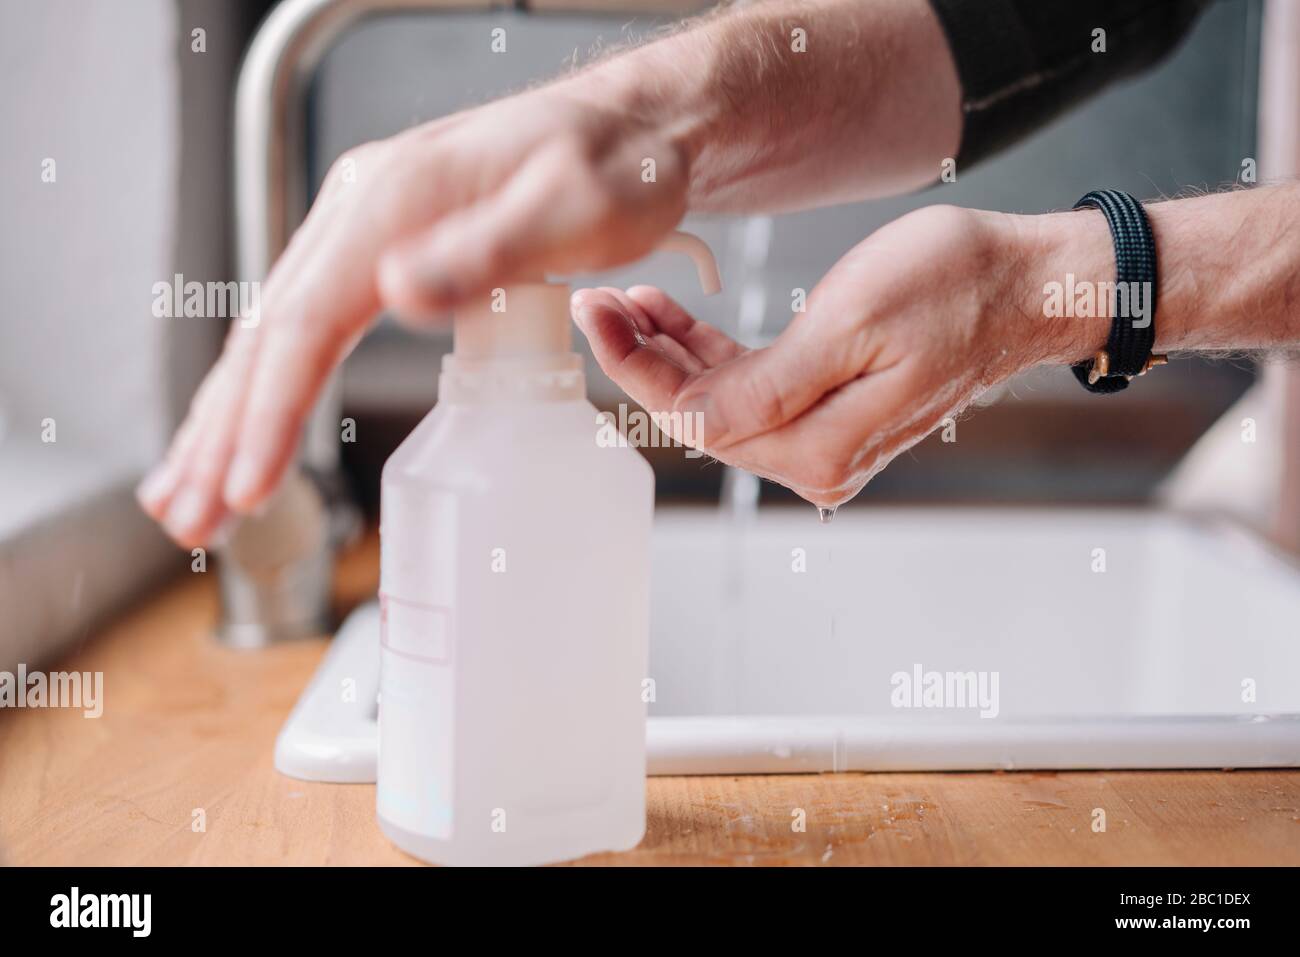 Close-up of man disinfecting his hands Stock Photo